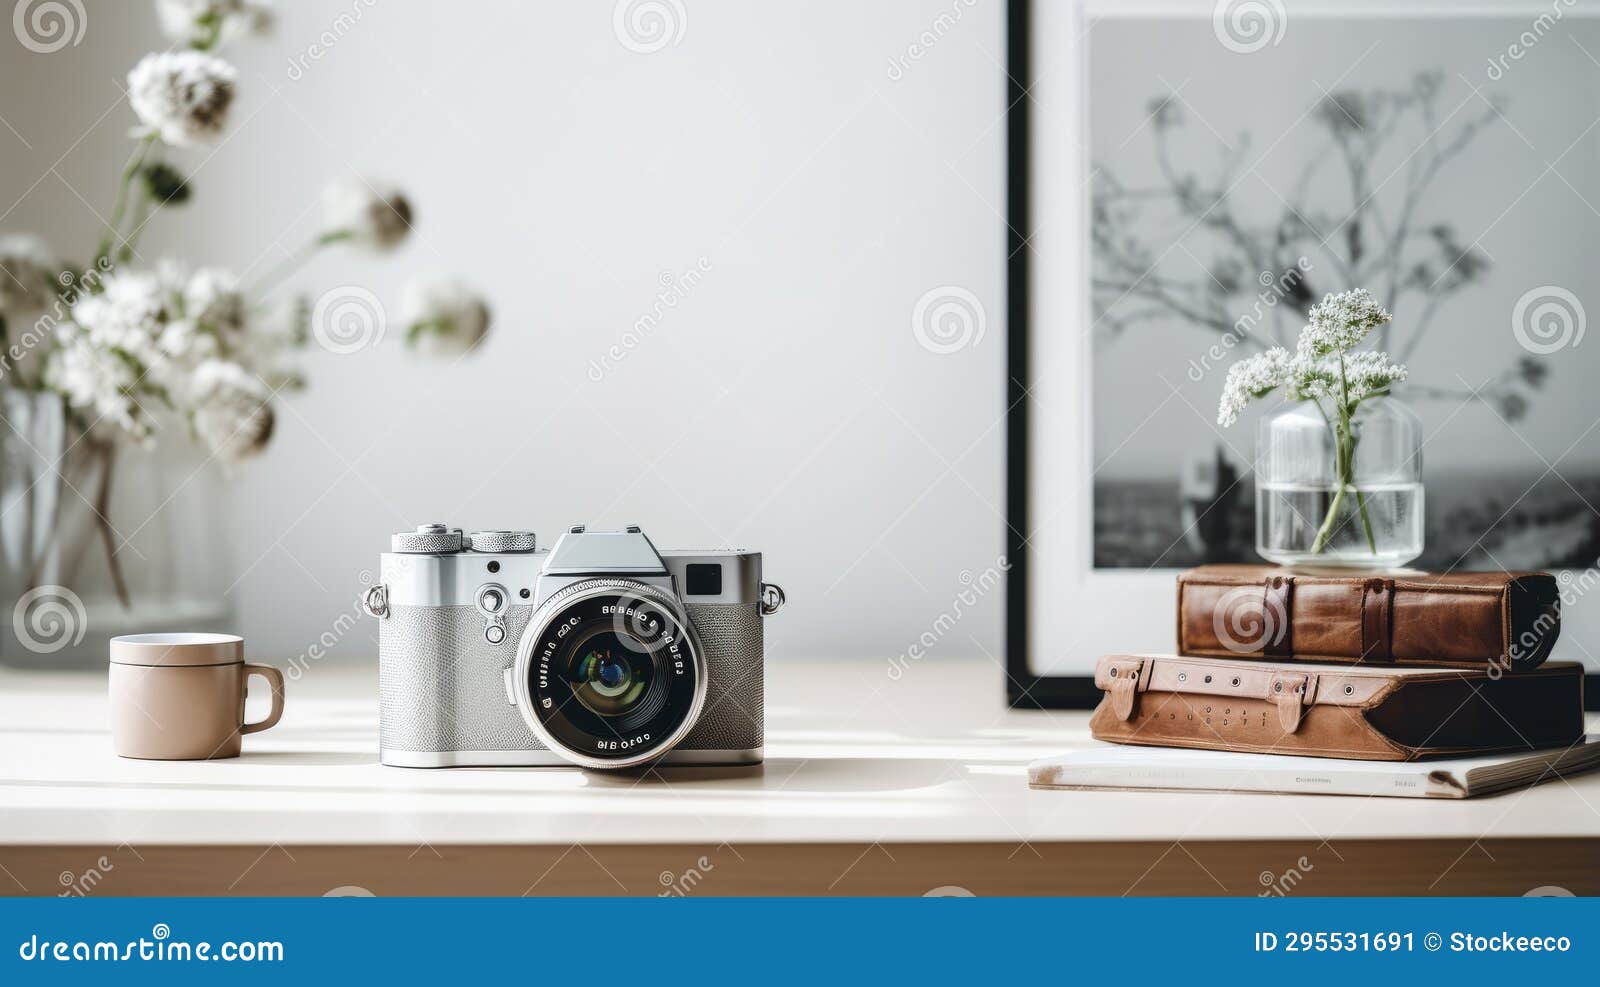 luxurious leica minilux zoom camera on wooden table